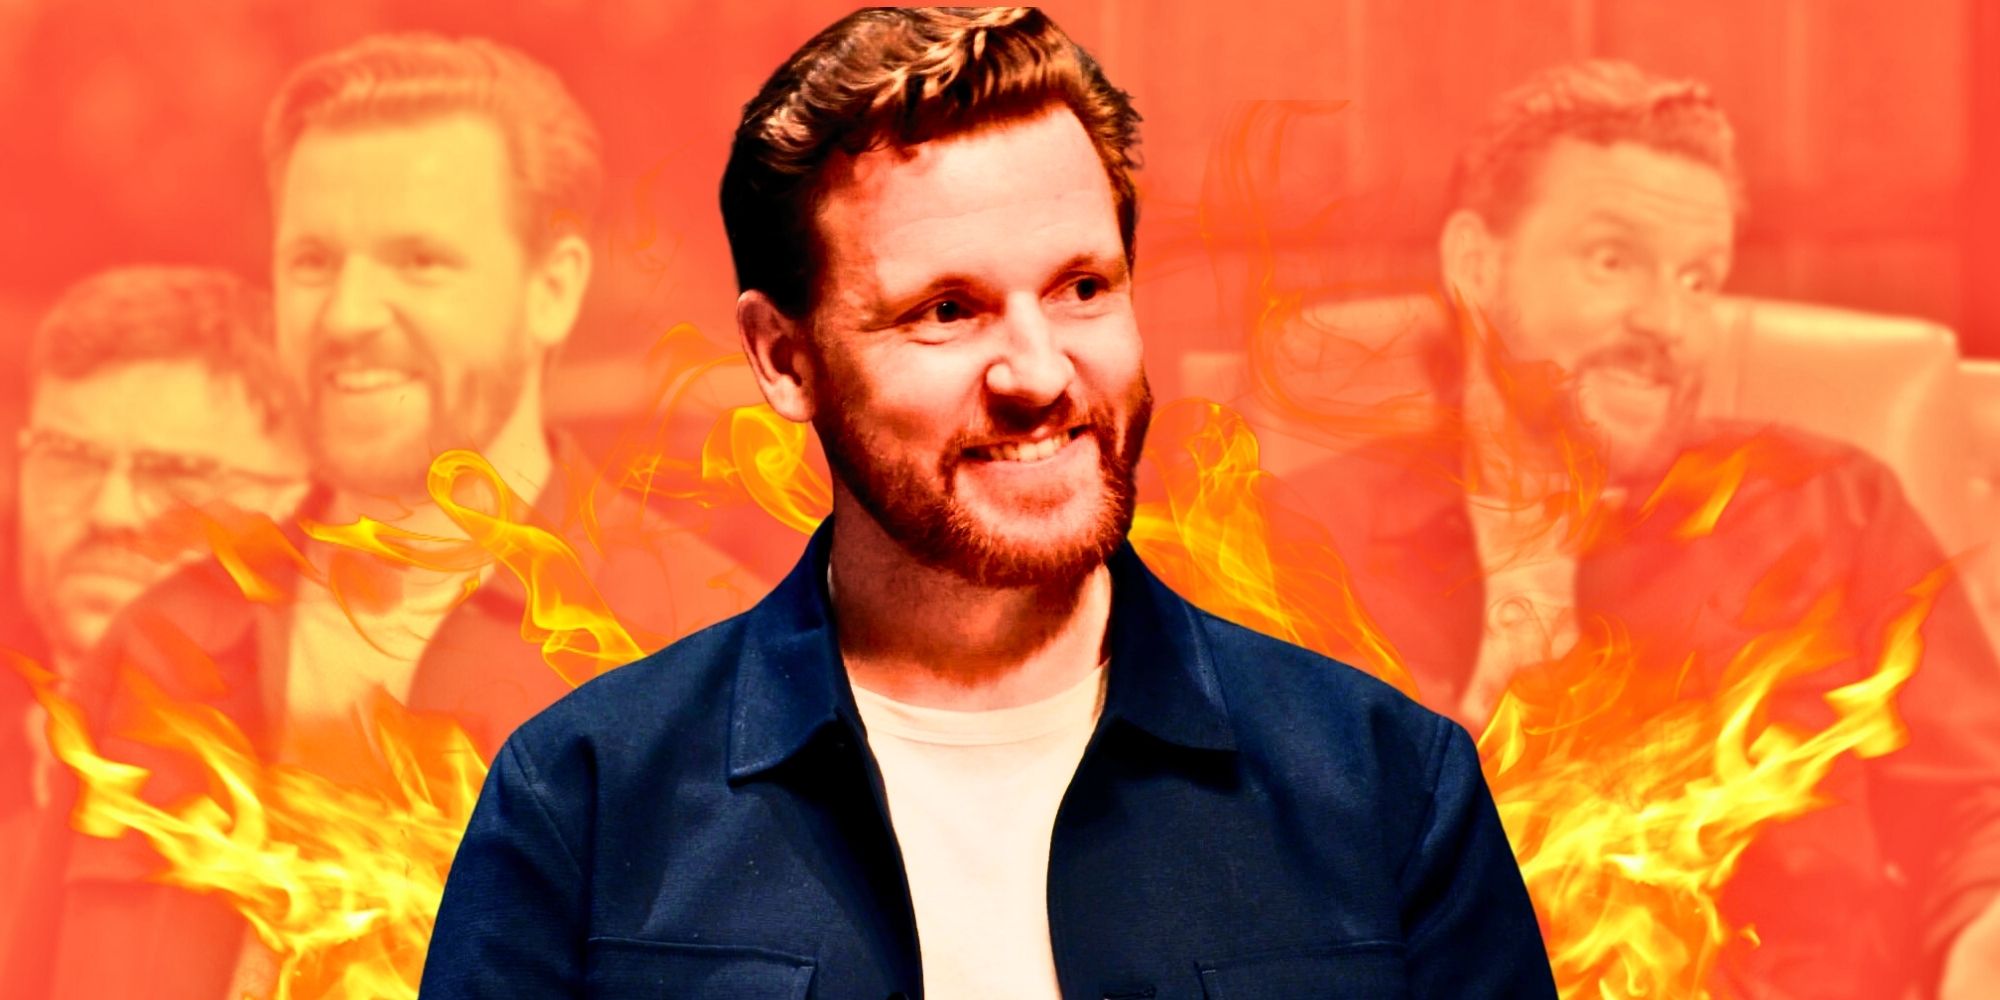 Montage of The Traitors UK Season 2's Paul Gorton, with fire behind him and orange background